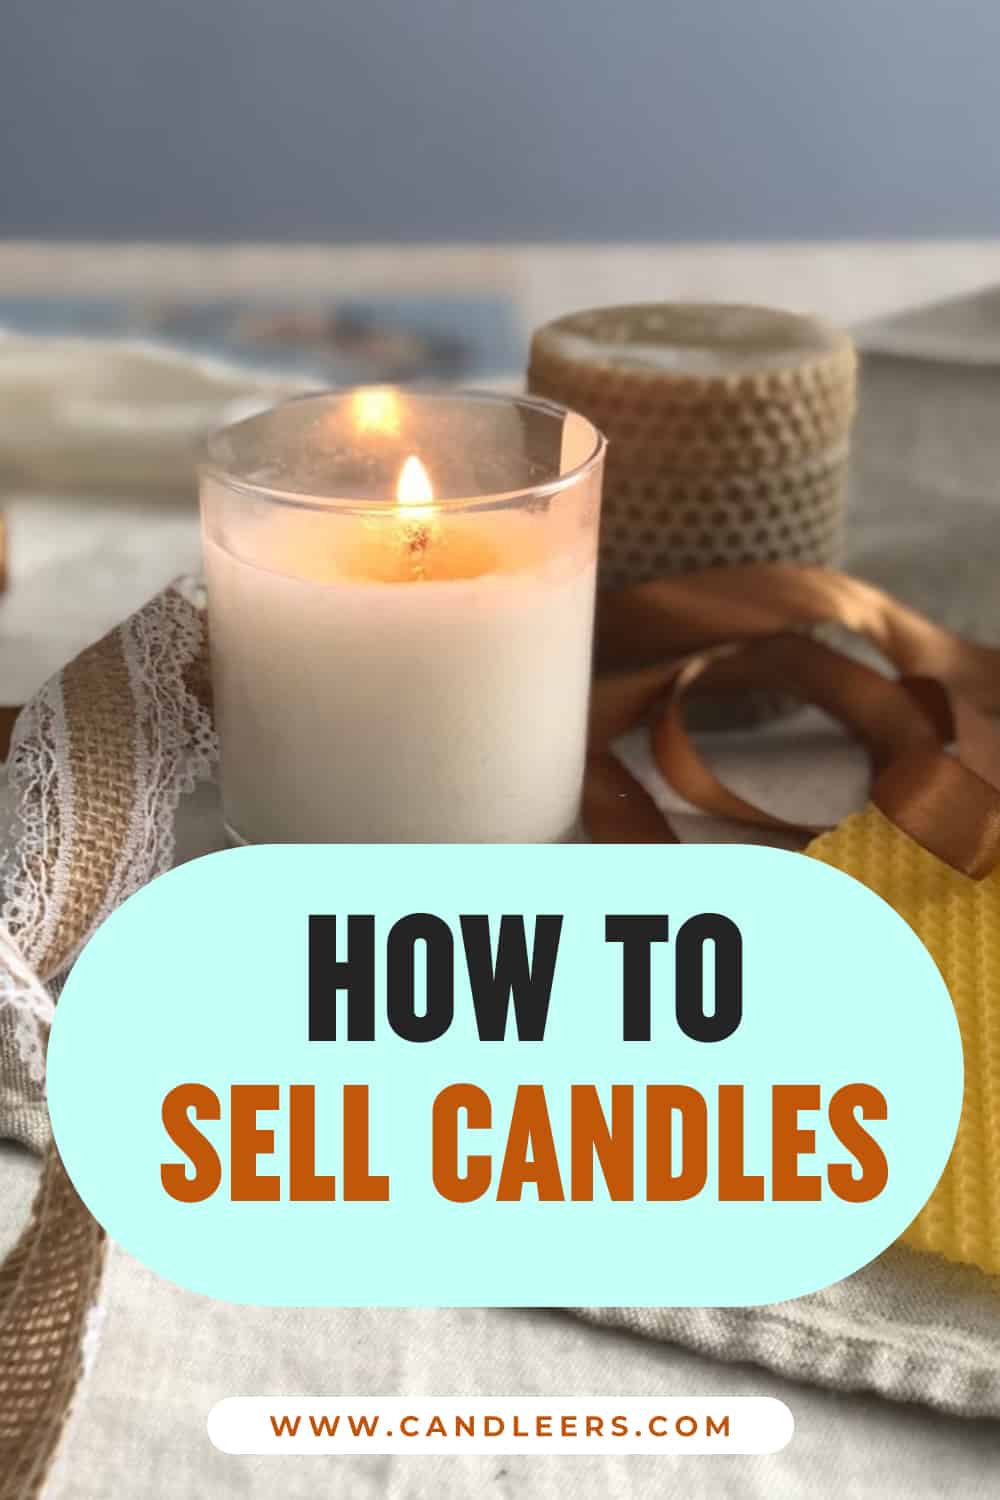 How To Sell Candles Candleers Candle Co